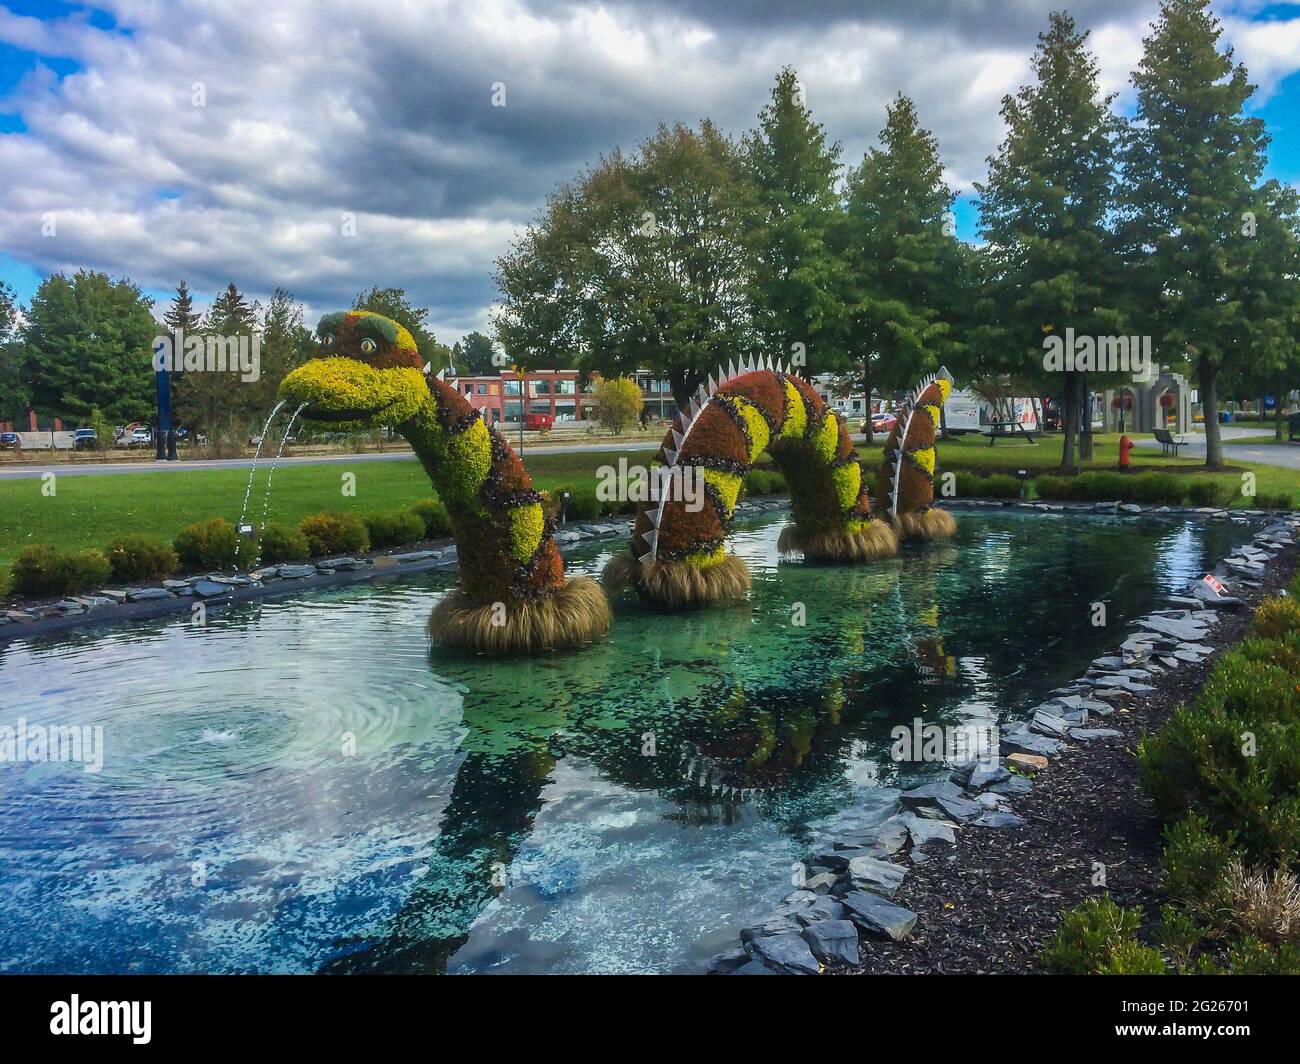 Quebec province, Canada, Sept 2019, colorful animal topiary looking like Memphré a snake/dragon fictional figures in a pond of Magog city Stock Photo